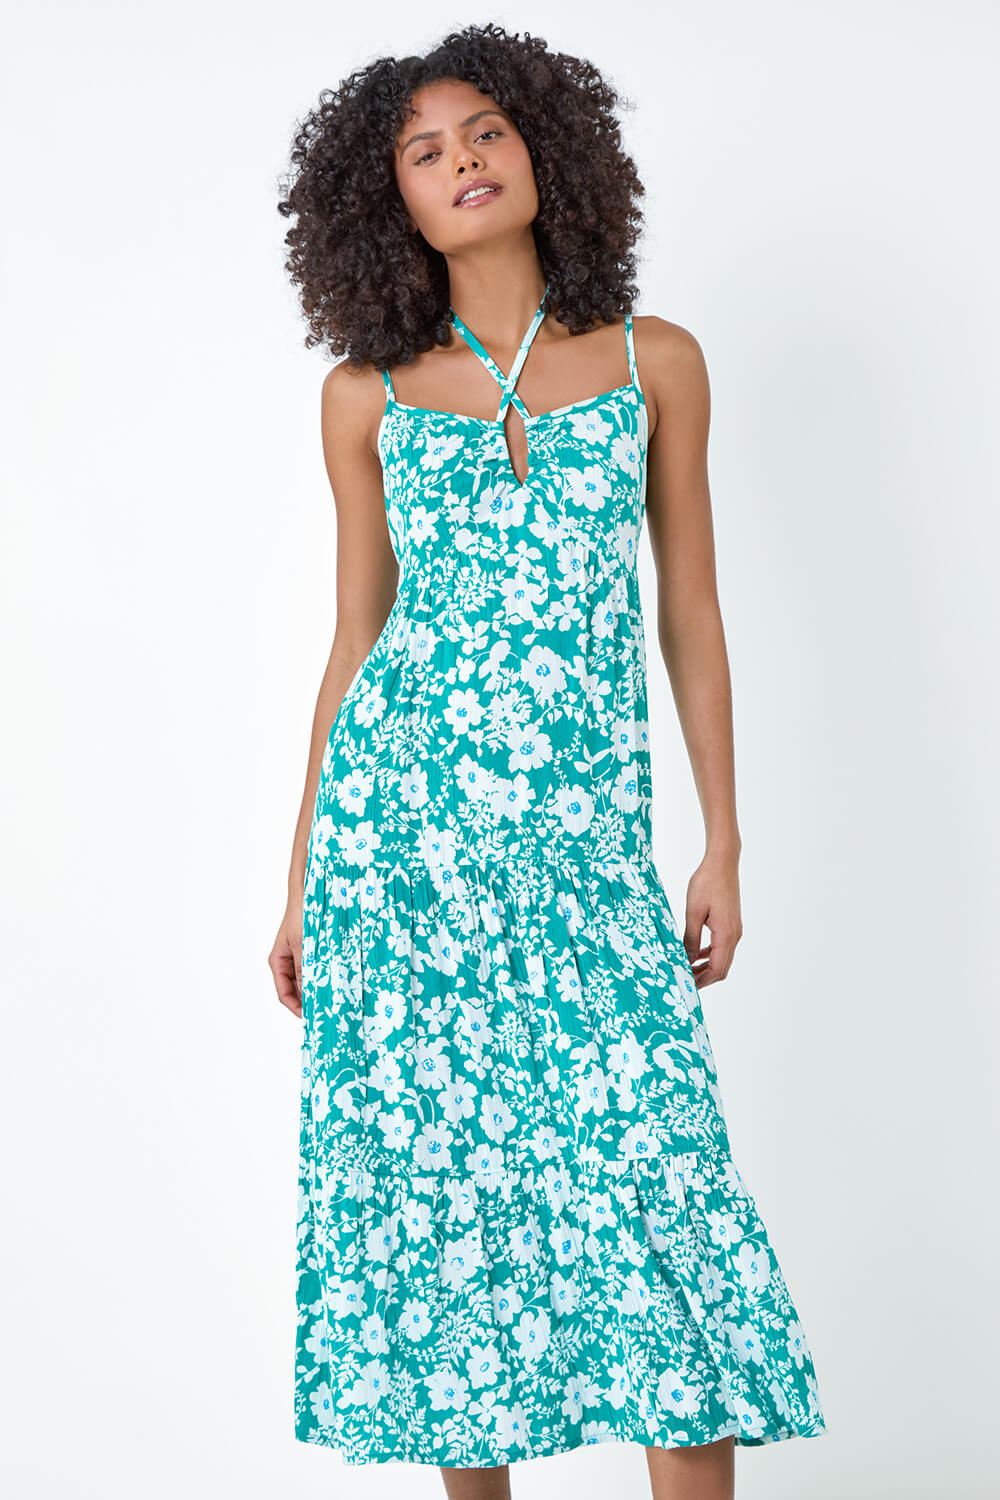 Turquoise Floral Strappy Cross Over Midi Dress, Image 4 of 5